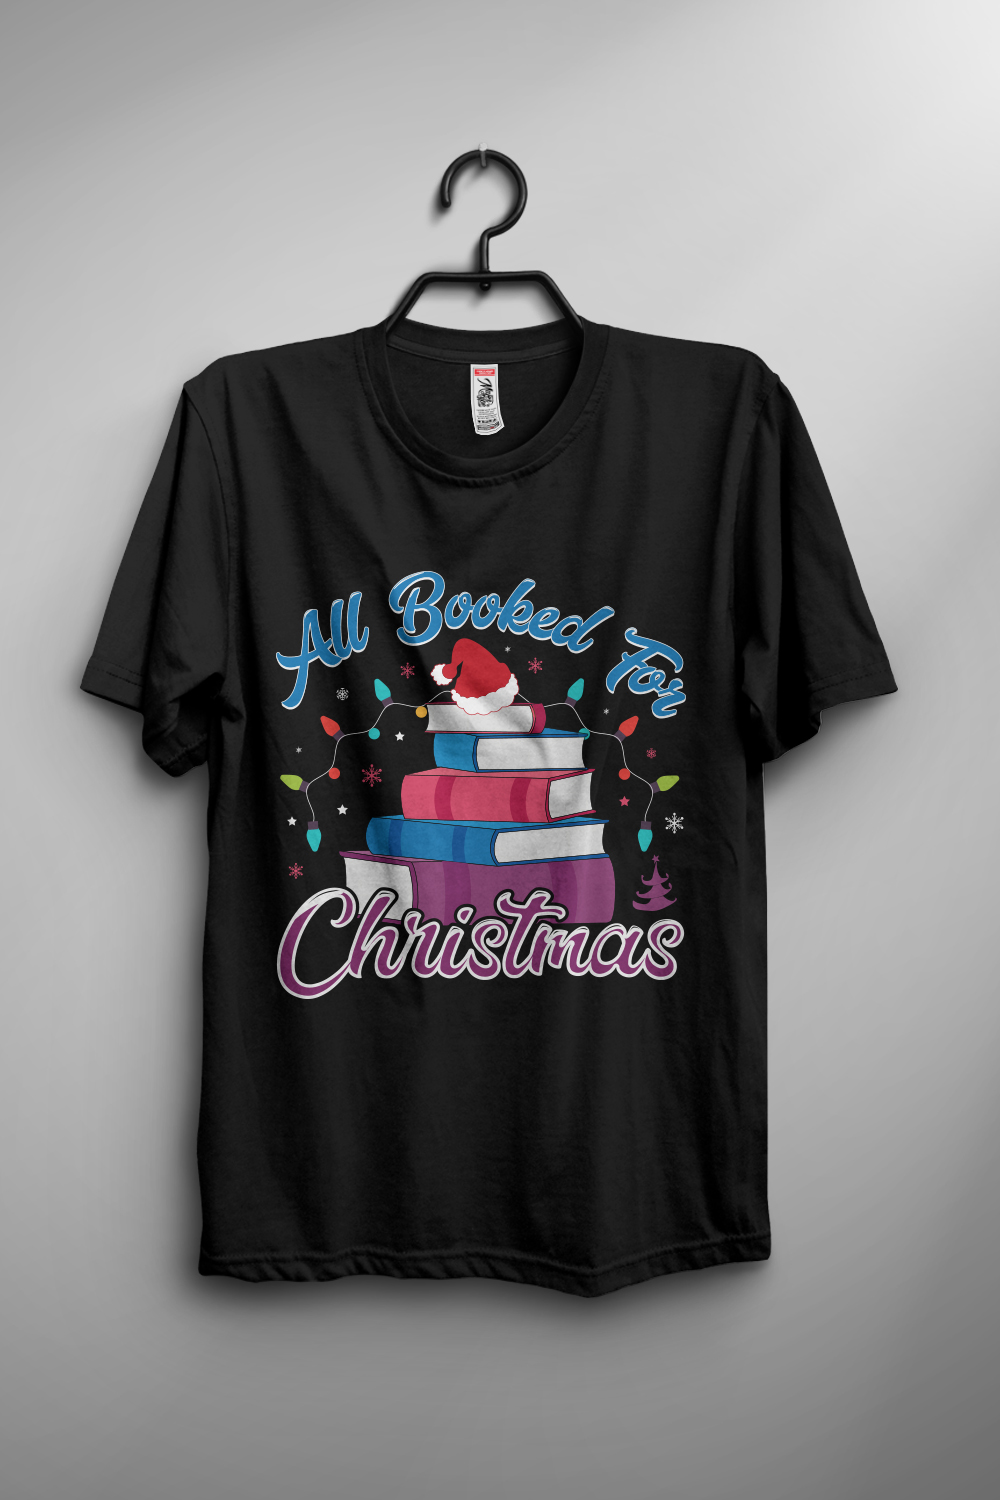 All Booked For Christmas T-shirt design pinterest preview image.